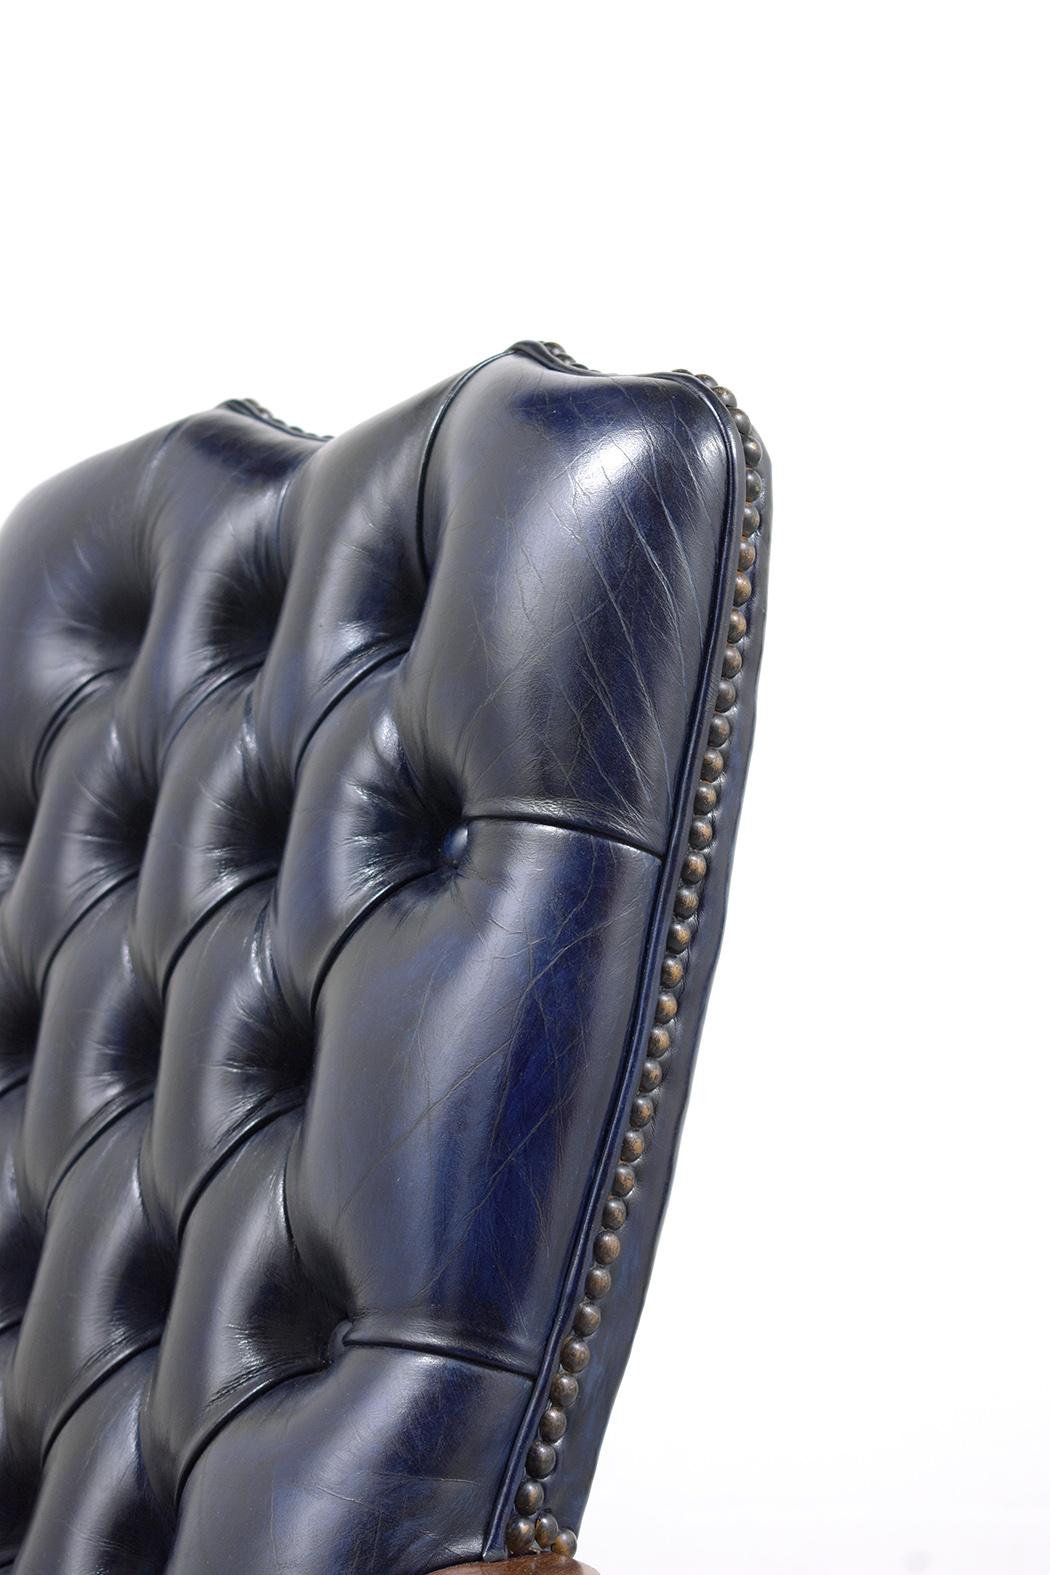 Chesterfield Tufted Leather Chairs 3